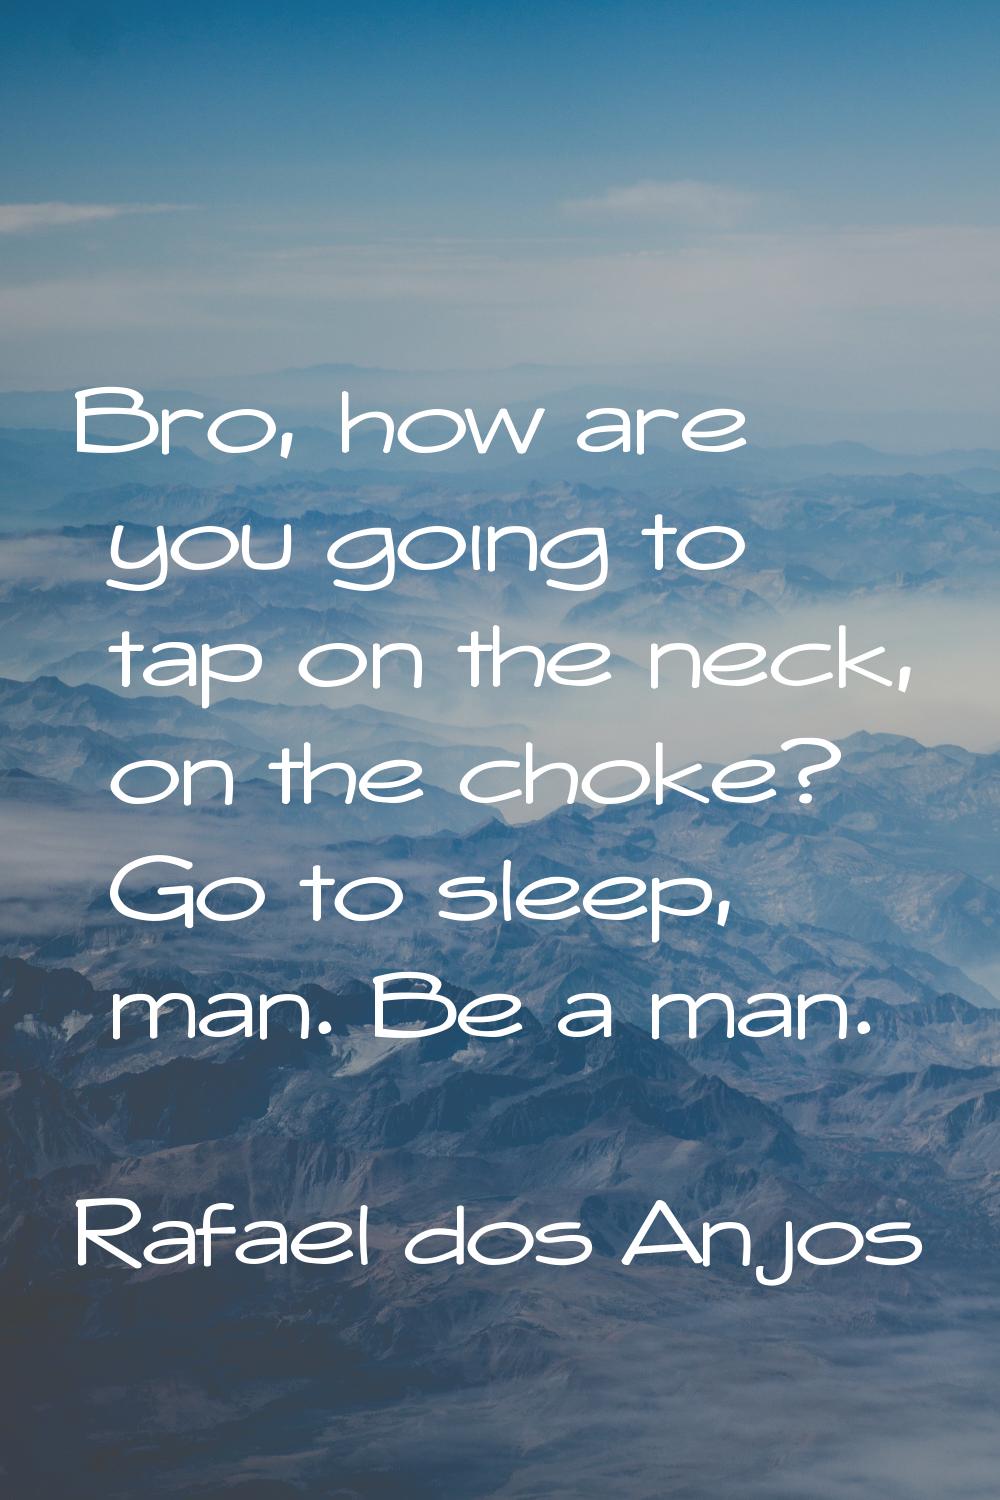 Bro, how are you going to tap on the neck, on the choke? Go to sleep, man. Be a man.